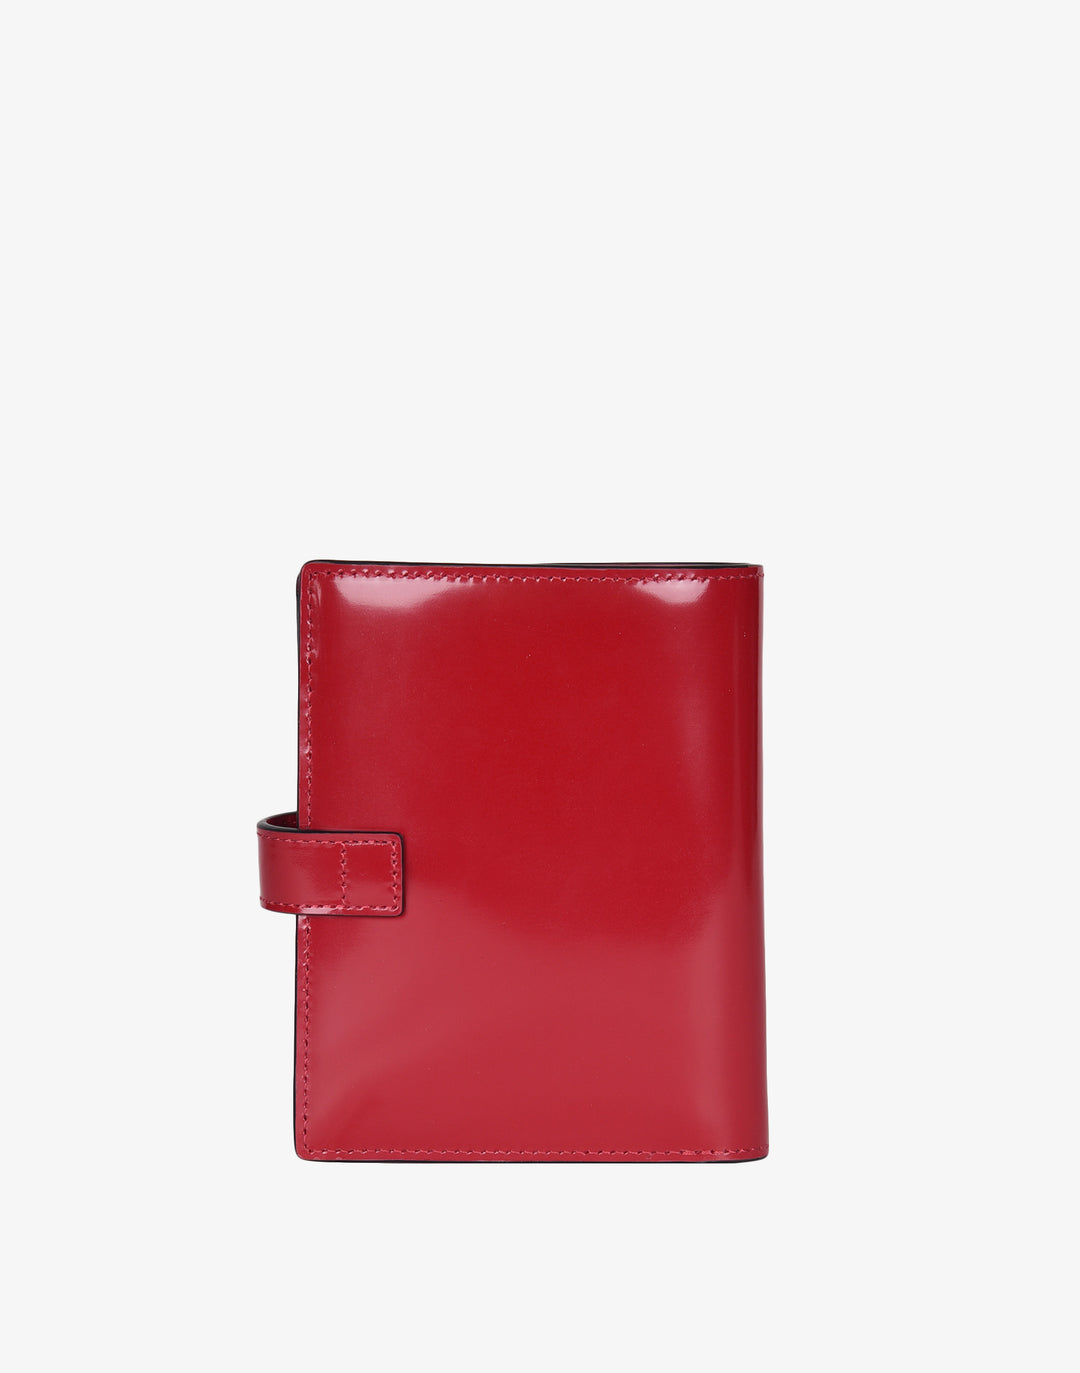 The Small Wallet - Saffiano Leather - Deep Navy / Gold / Camel